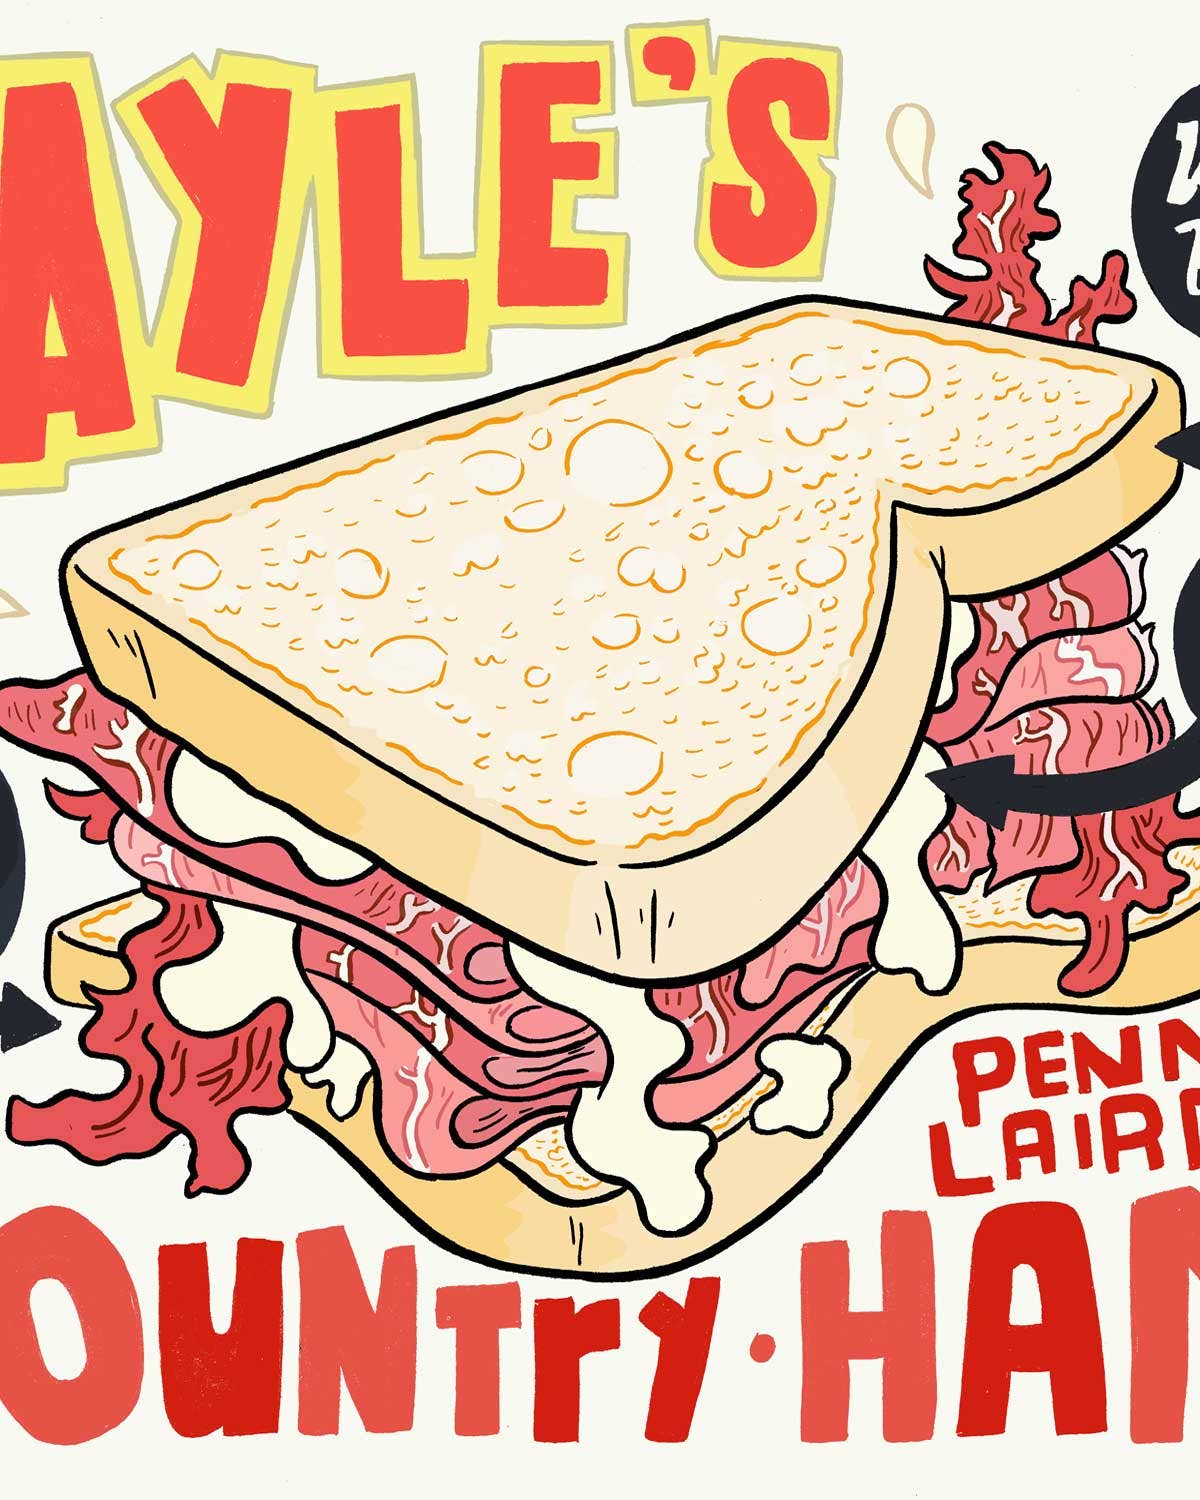 Virginia’s Unsung Country Ham Shop Sells a Life-Changing Sandwich